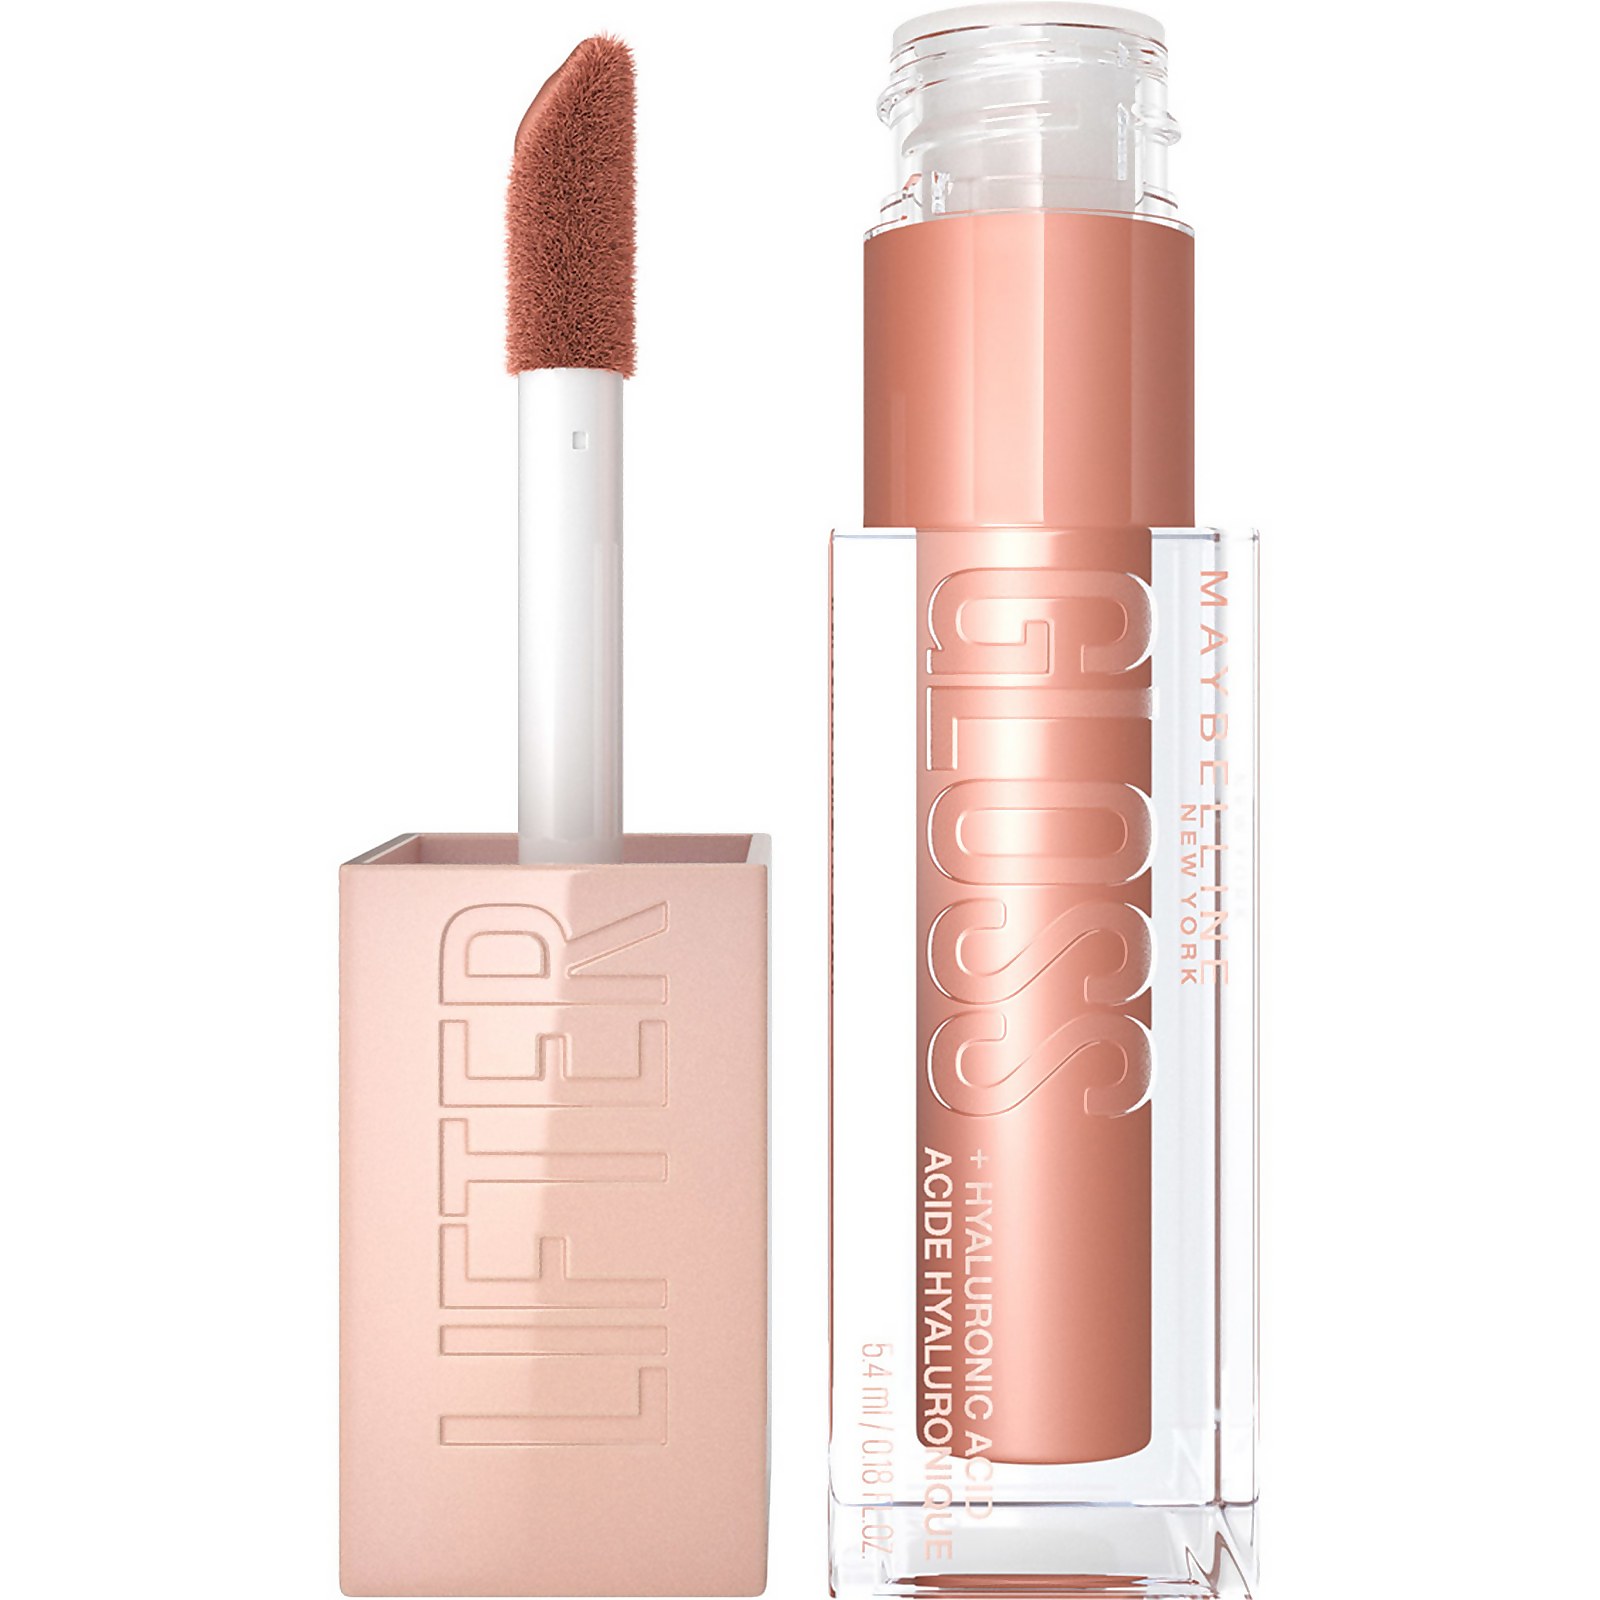 Image of Maybelline Lifter Gloss Hydrating Lip Gloss with Hyaluronic Acid 5g (Various Shades) - 008 Stone